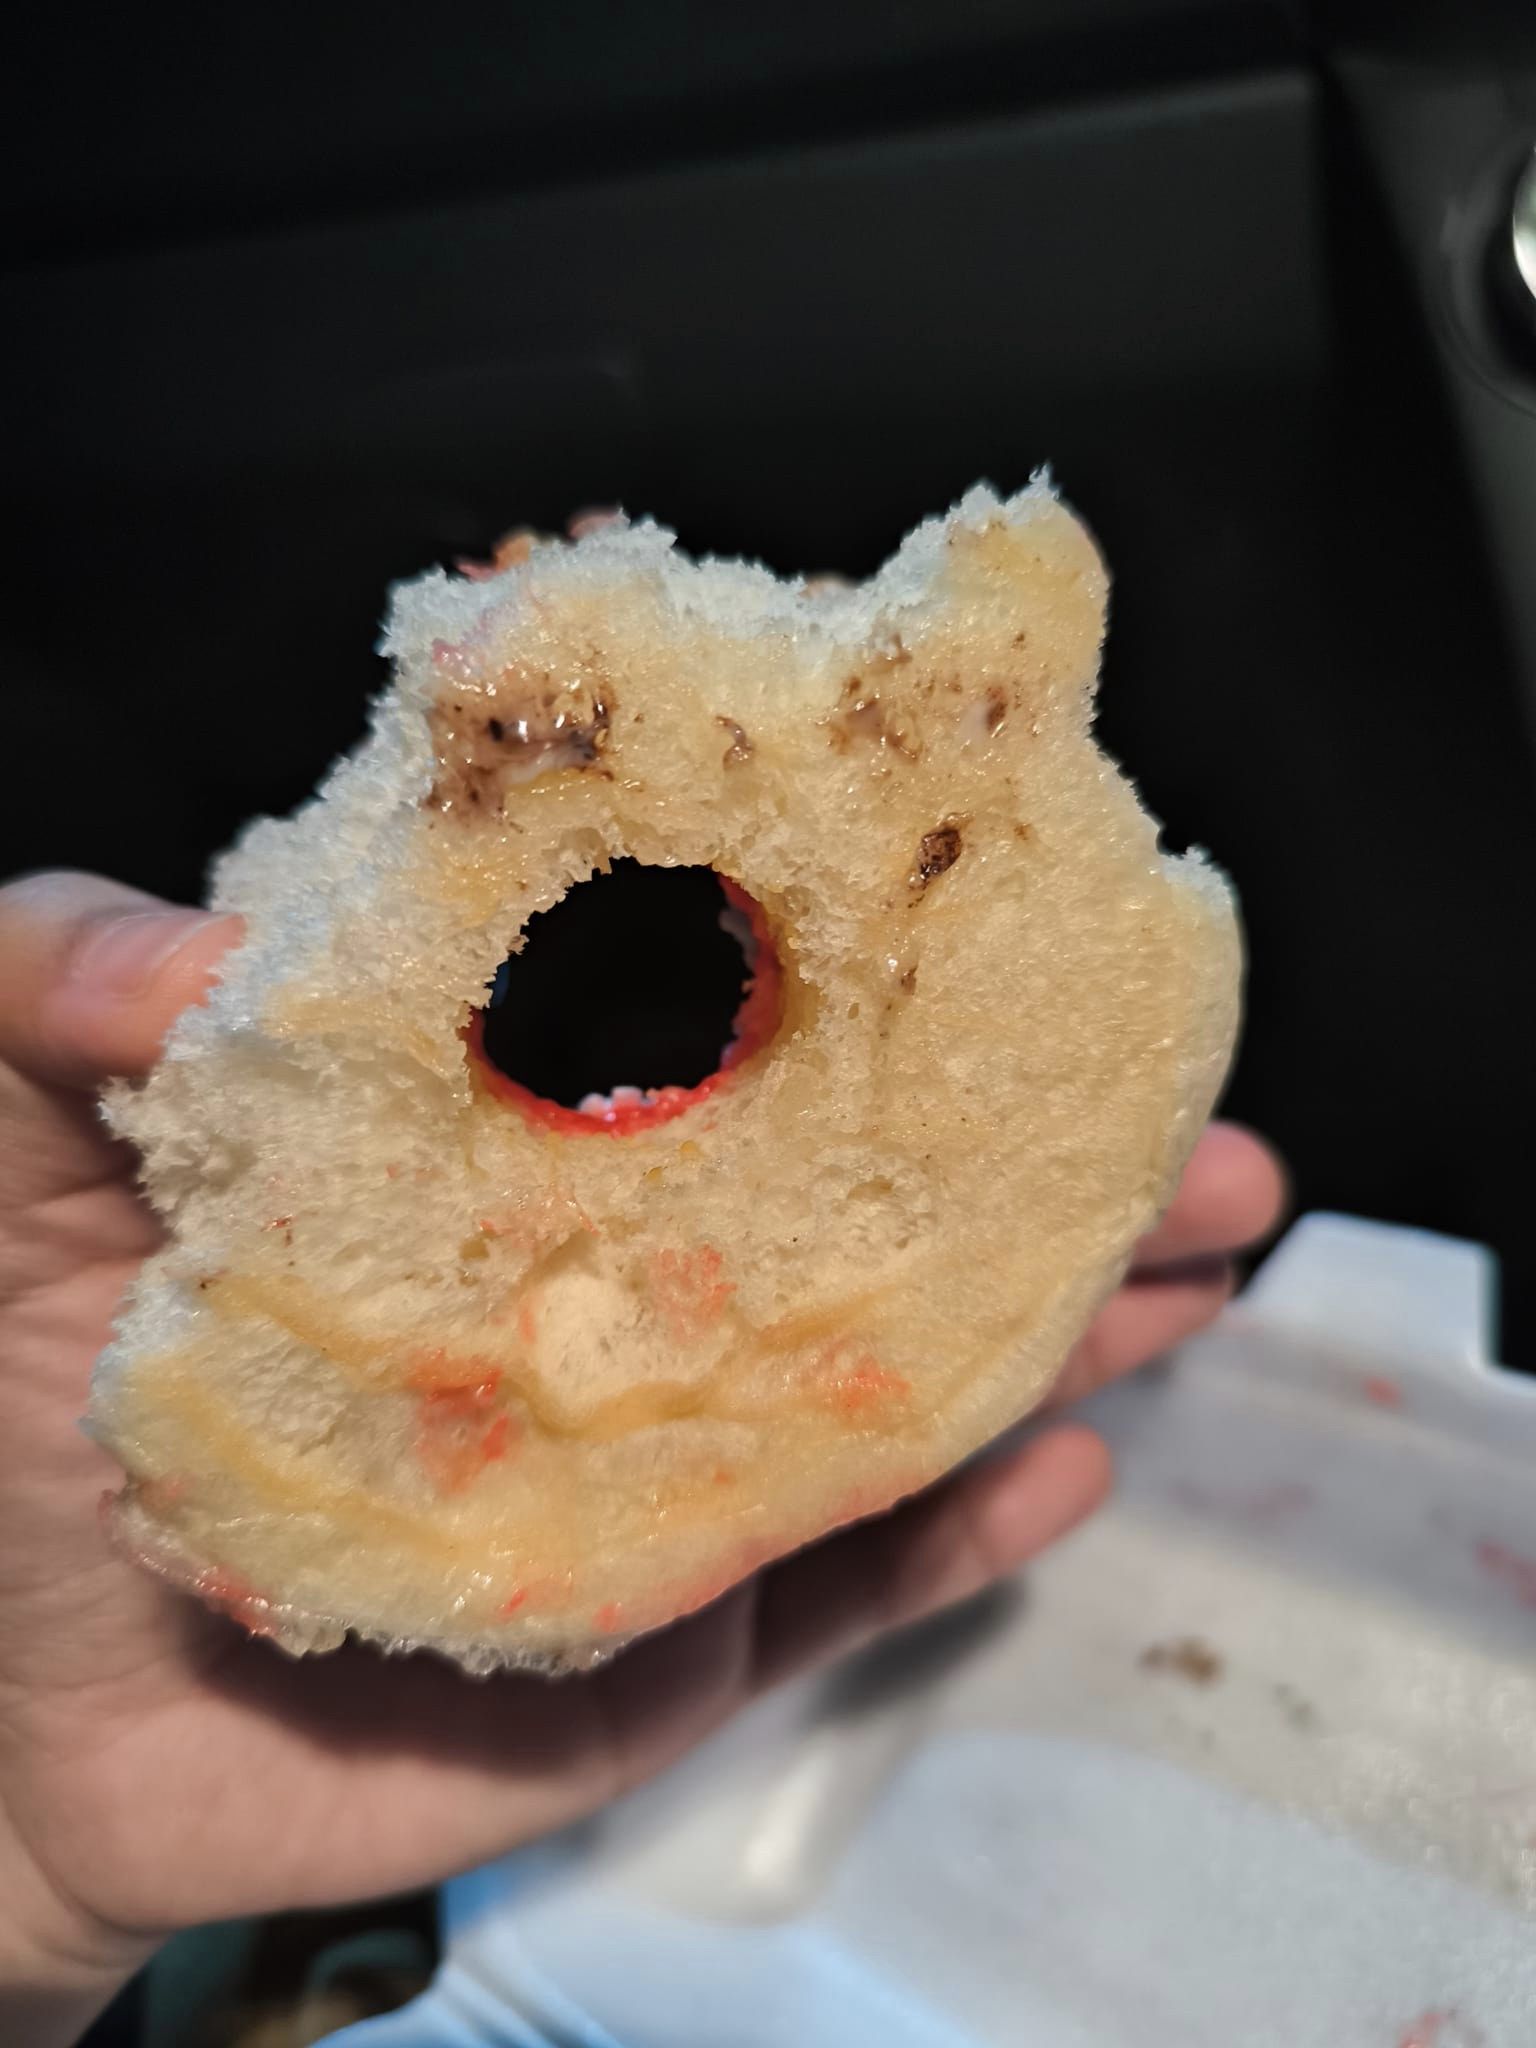 Donut which is actually burger bun with a hole